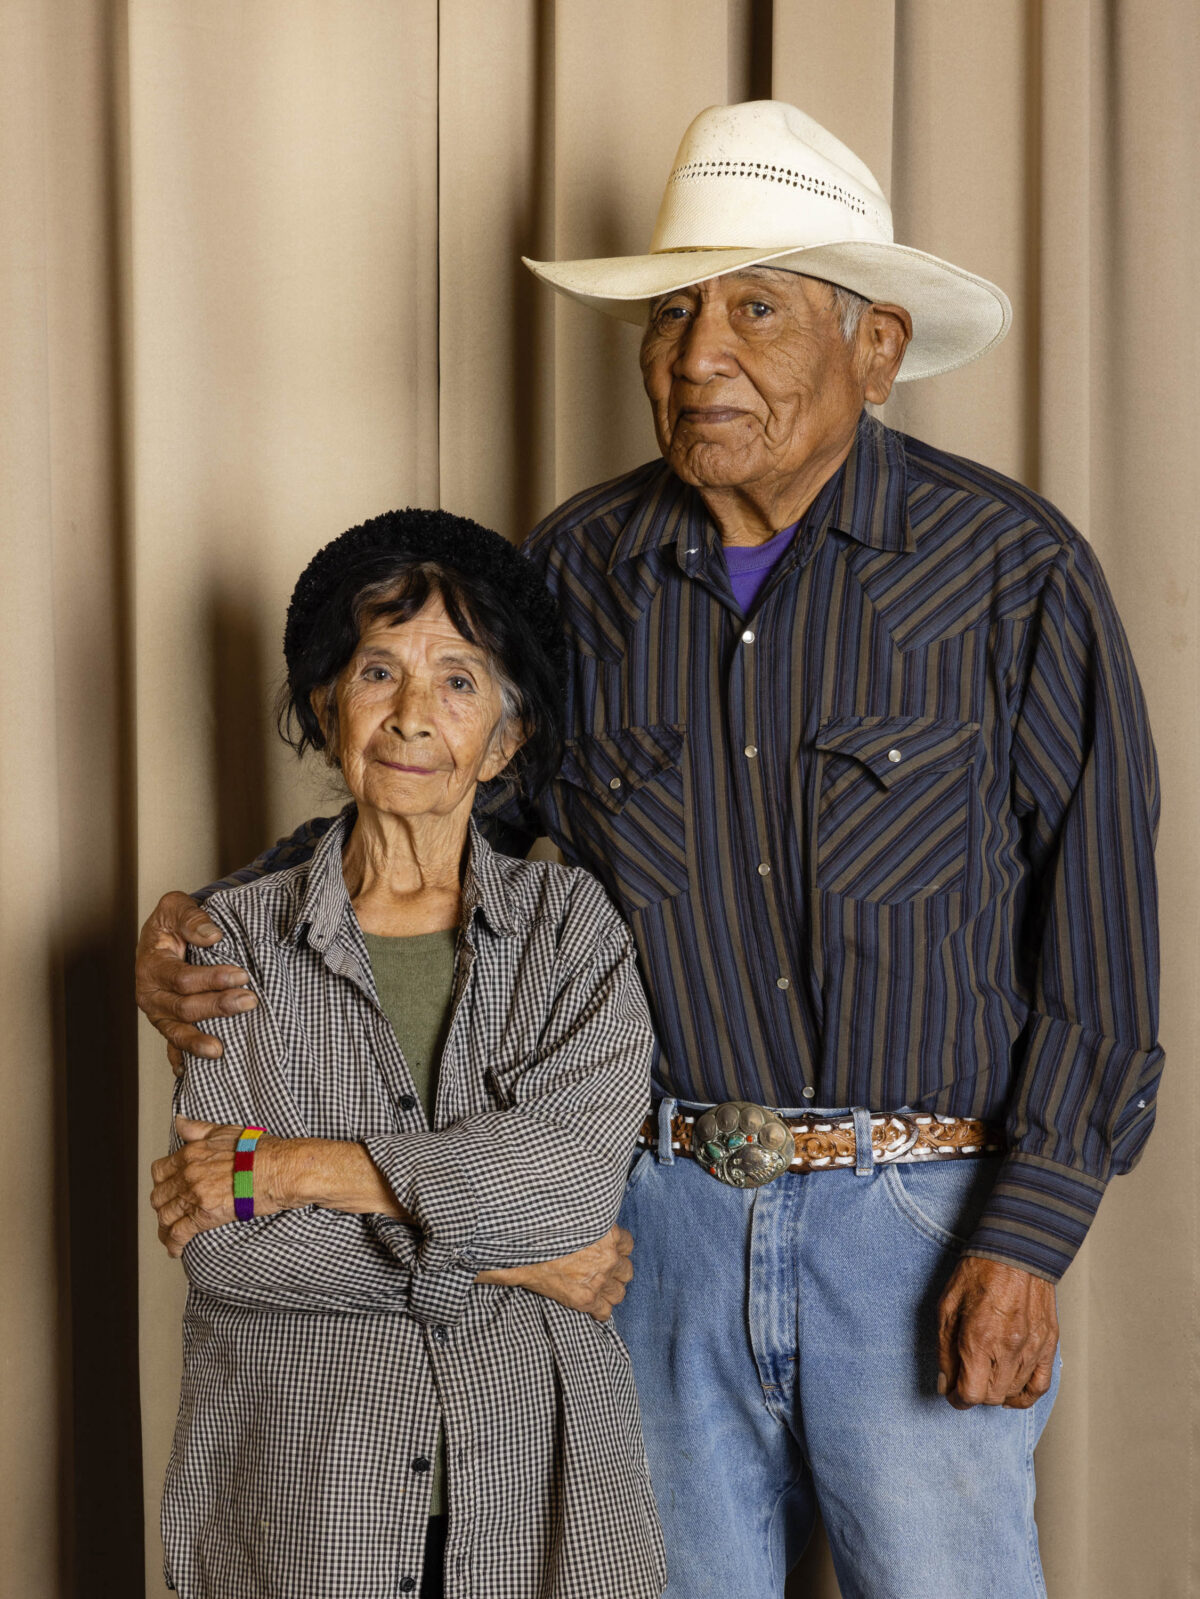 Owners of La Indita restaurant Maria and Joseph Garcia pose for a portrait  in Tucson, AZ on December 10th 2021.